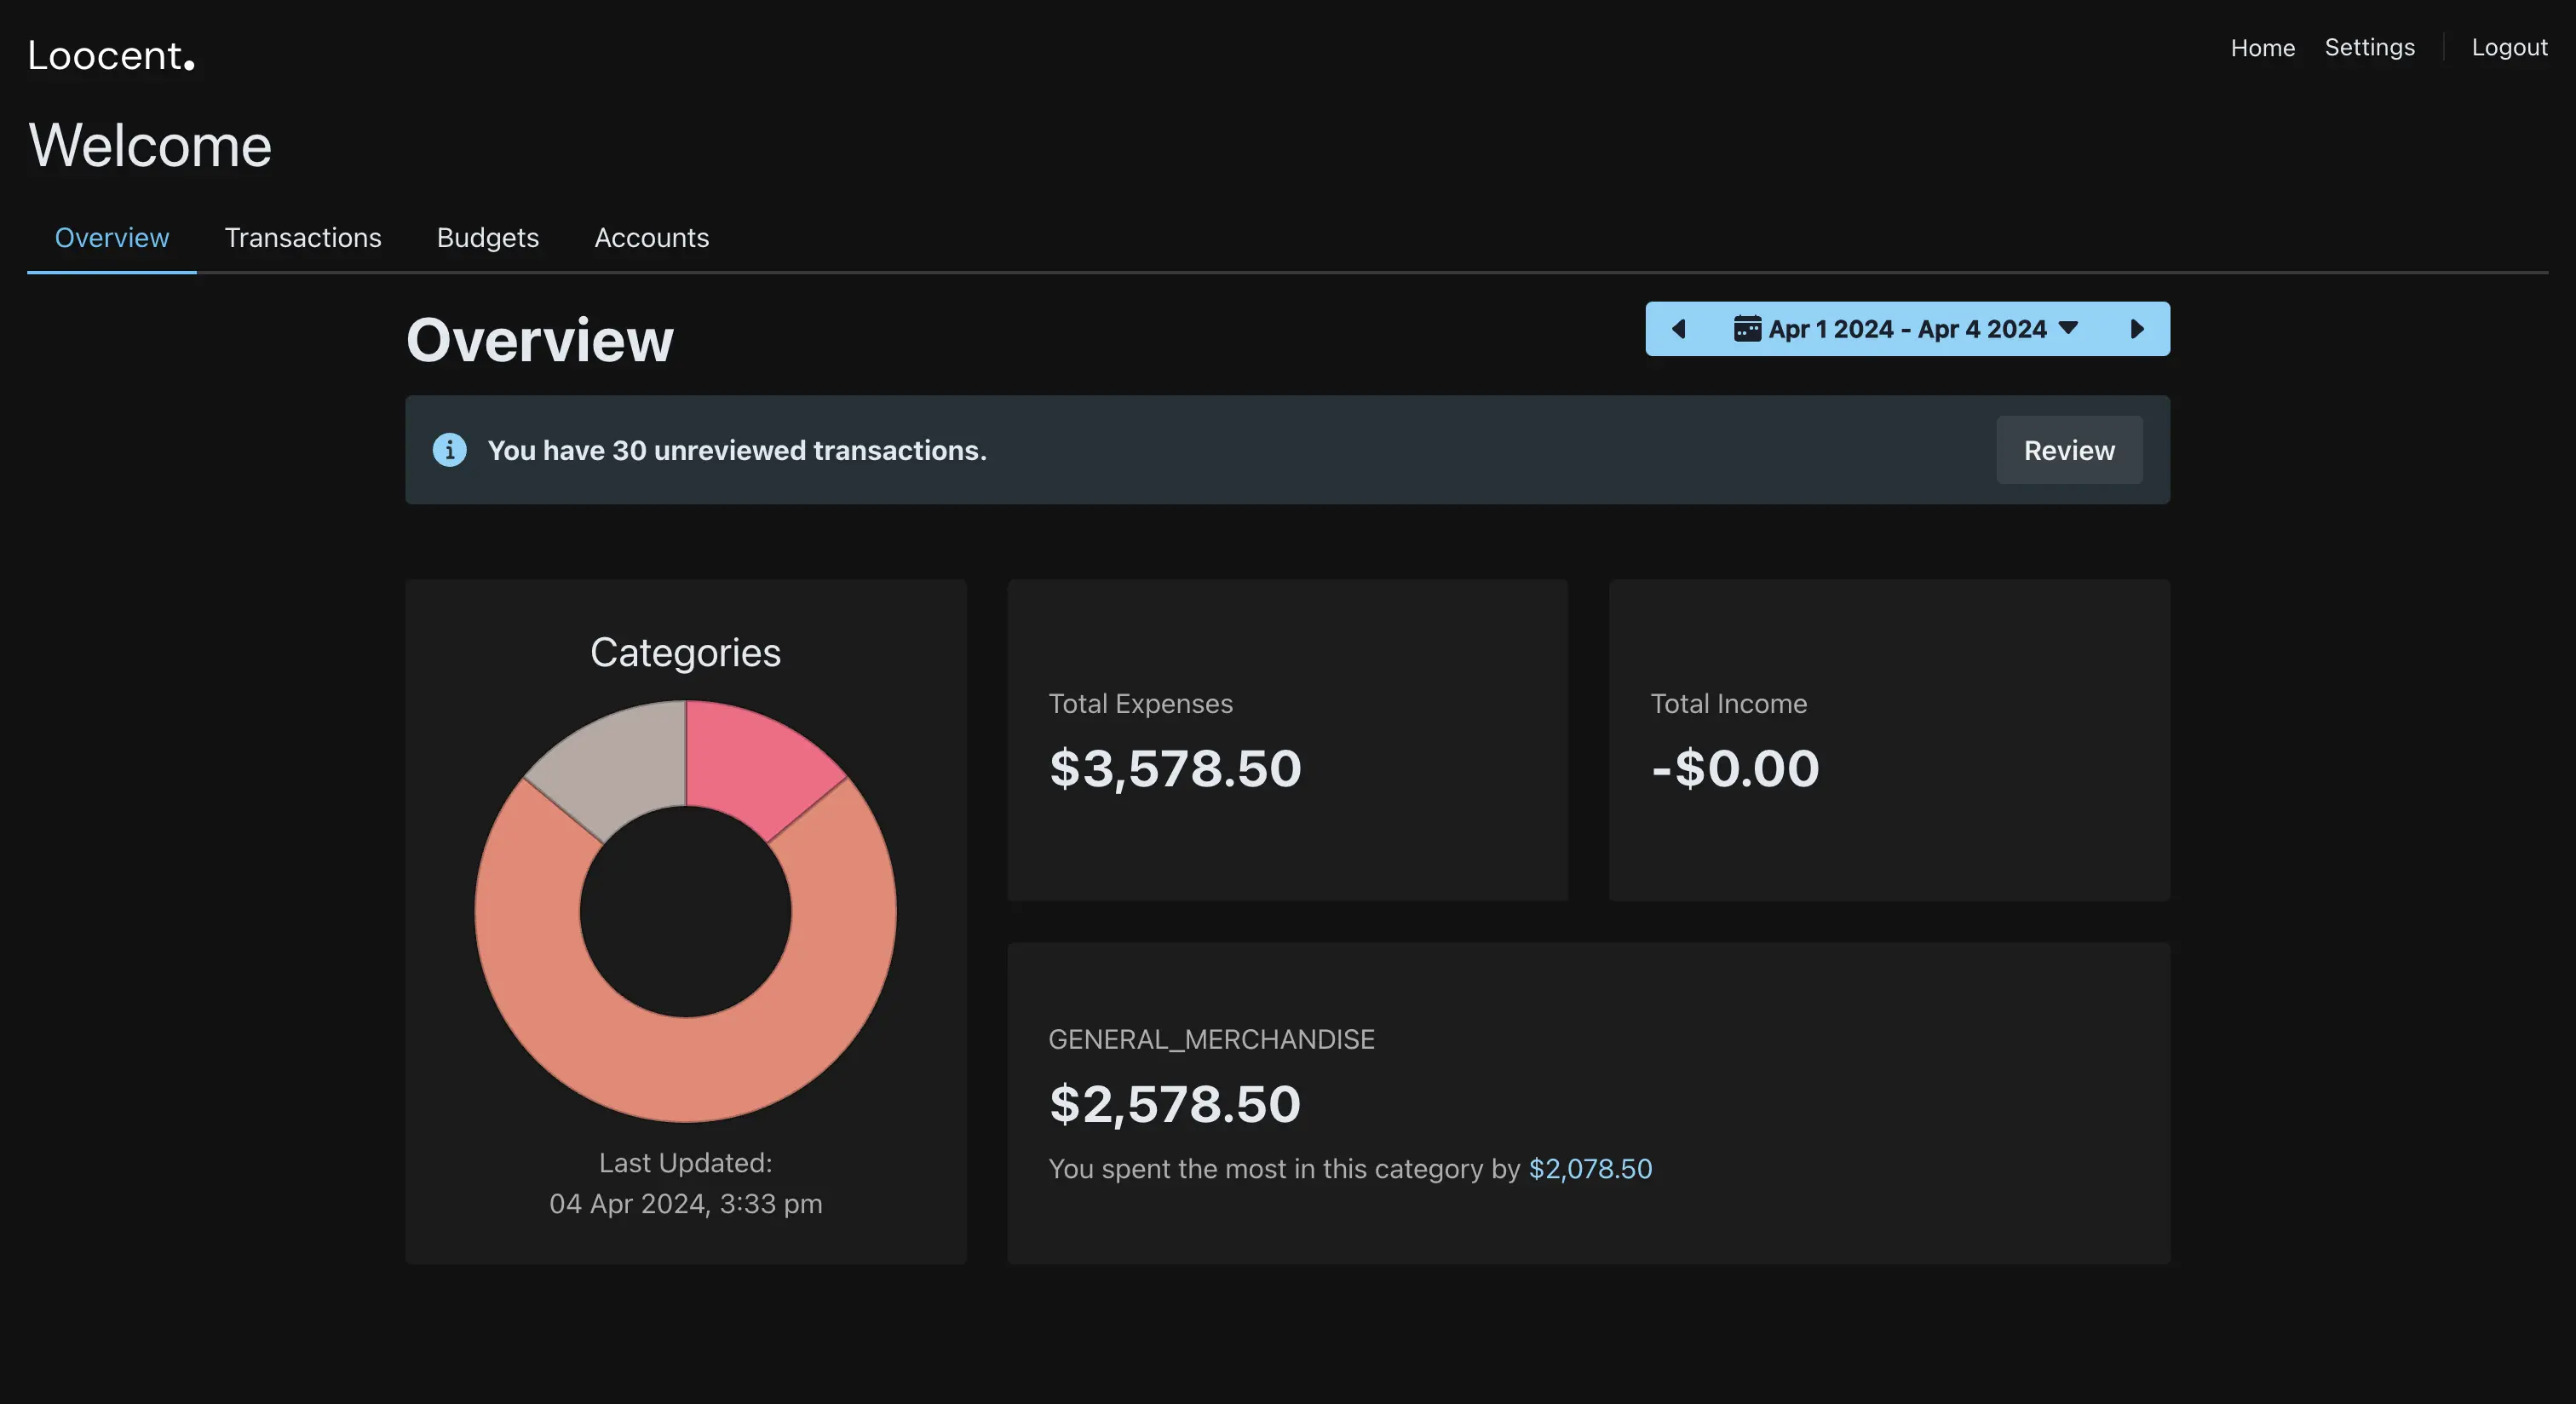 Loocent's financial management dashboard